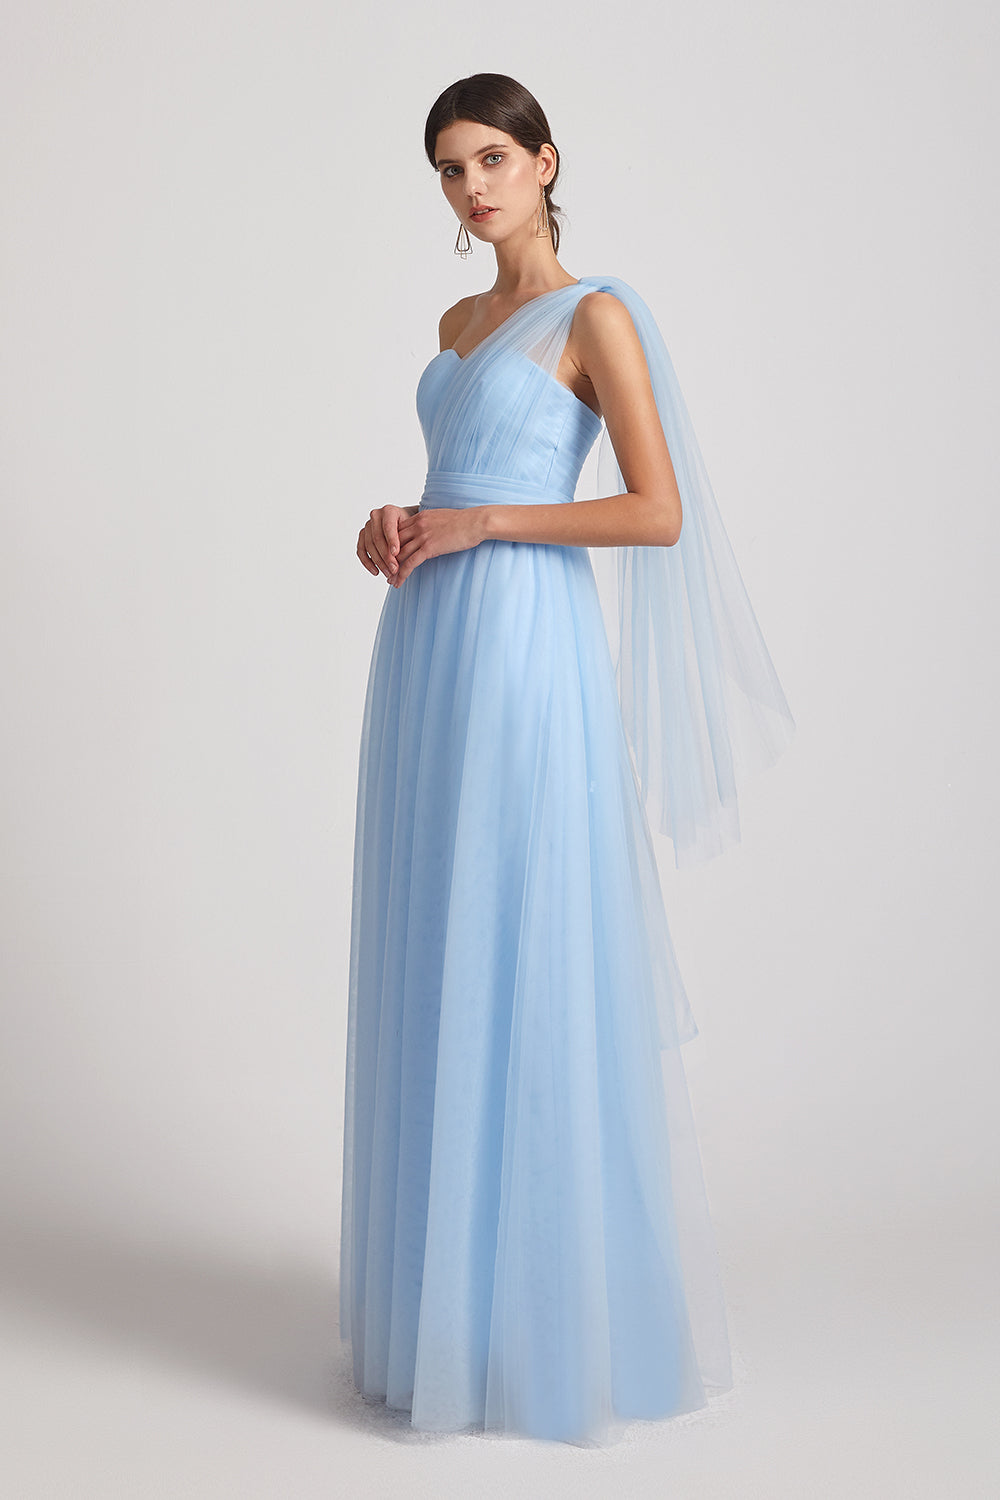 convertible a-line pleated bridesmaid gowns